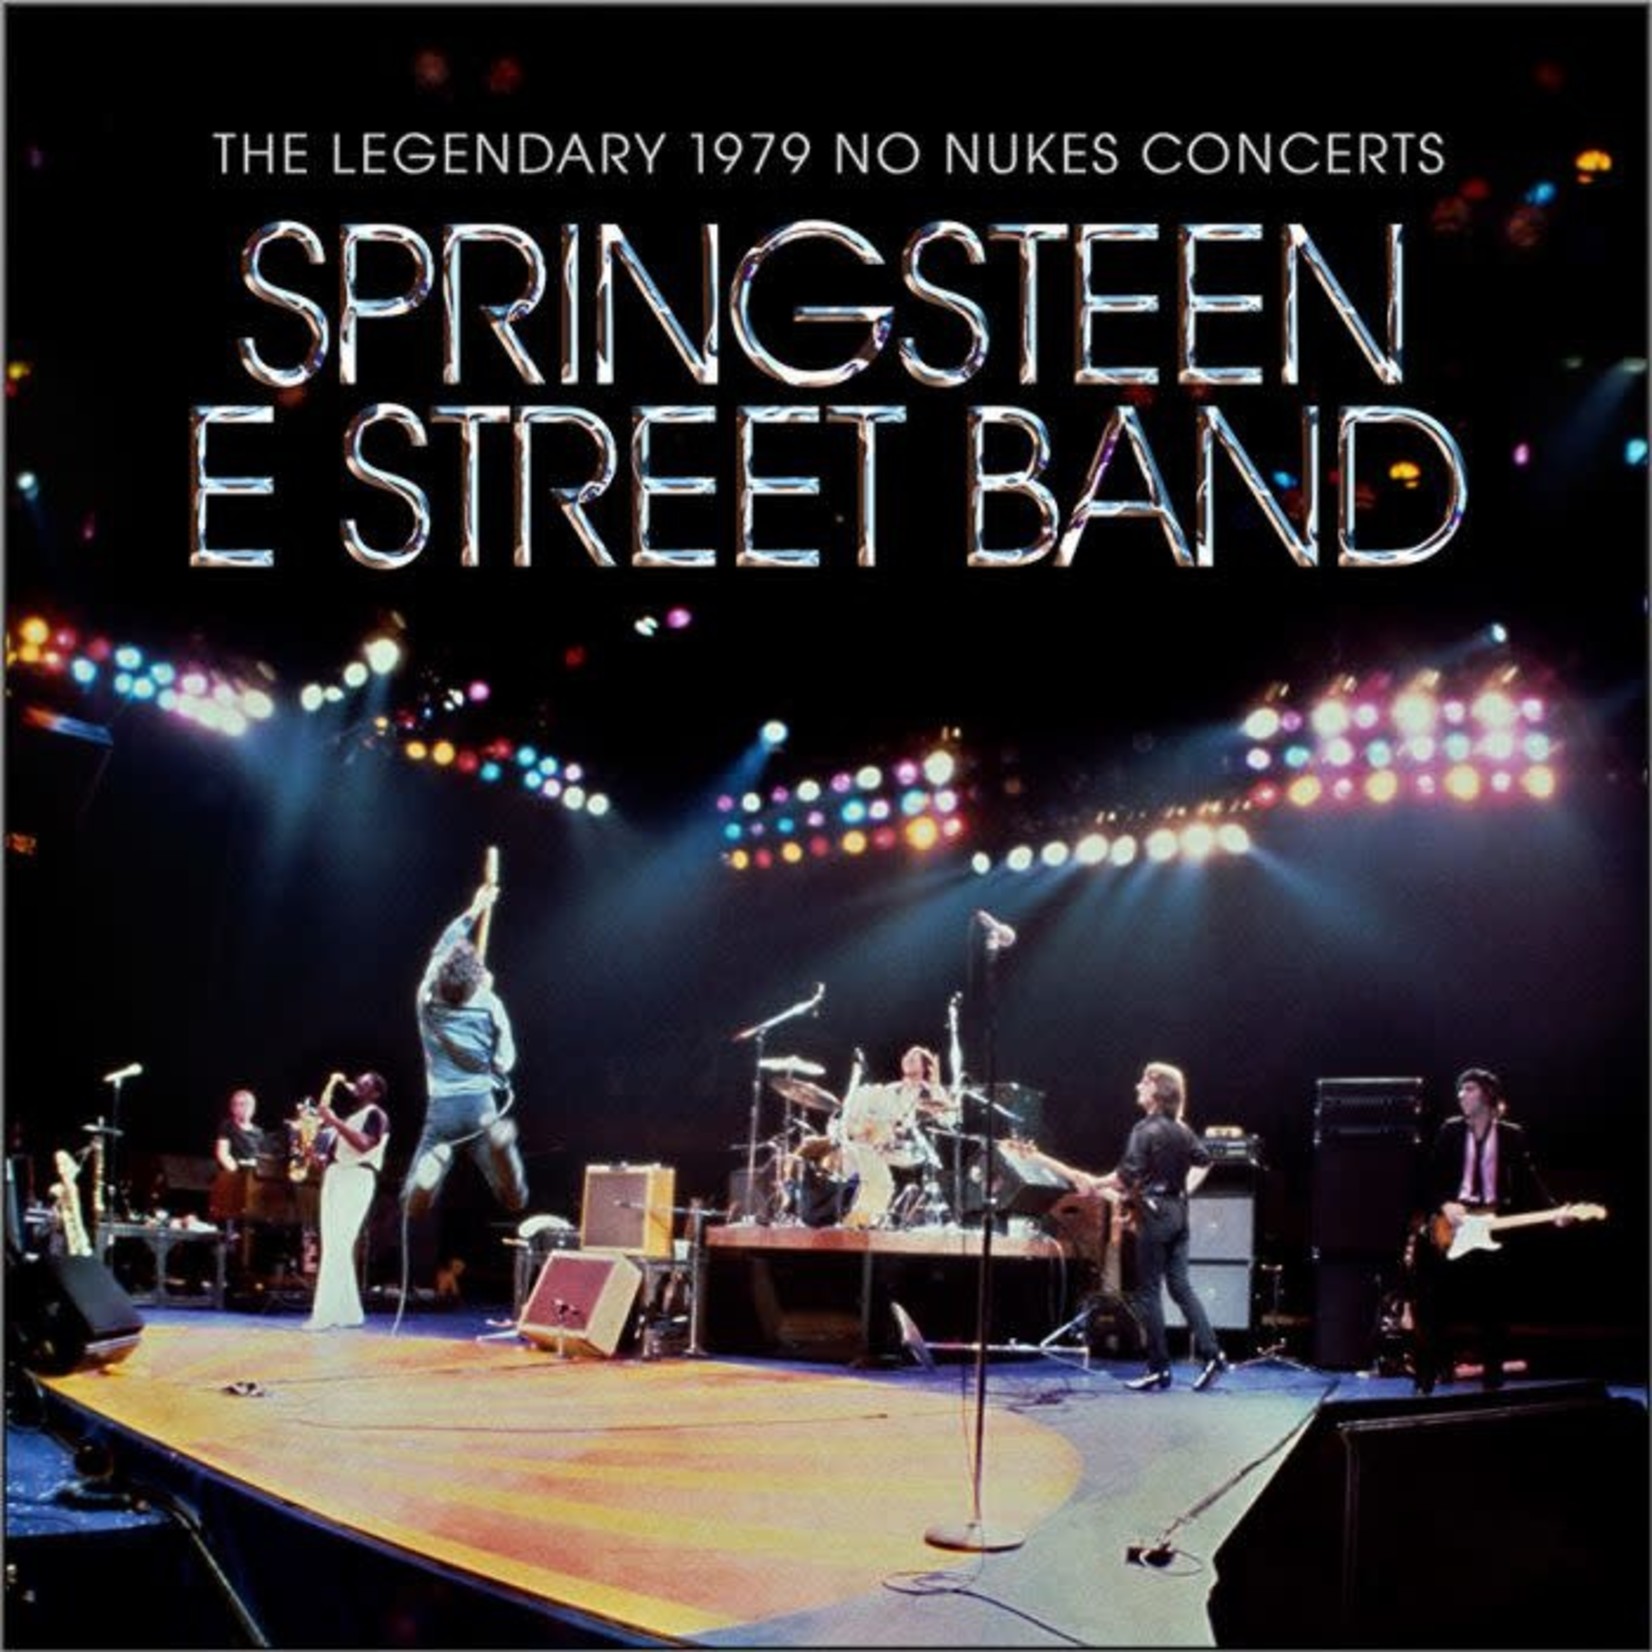 [New] Springsteen, Bruce: The Legendary 1979 No Nukes Concerts with the E Street Band (2LP) [COLUMBIA]